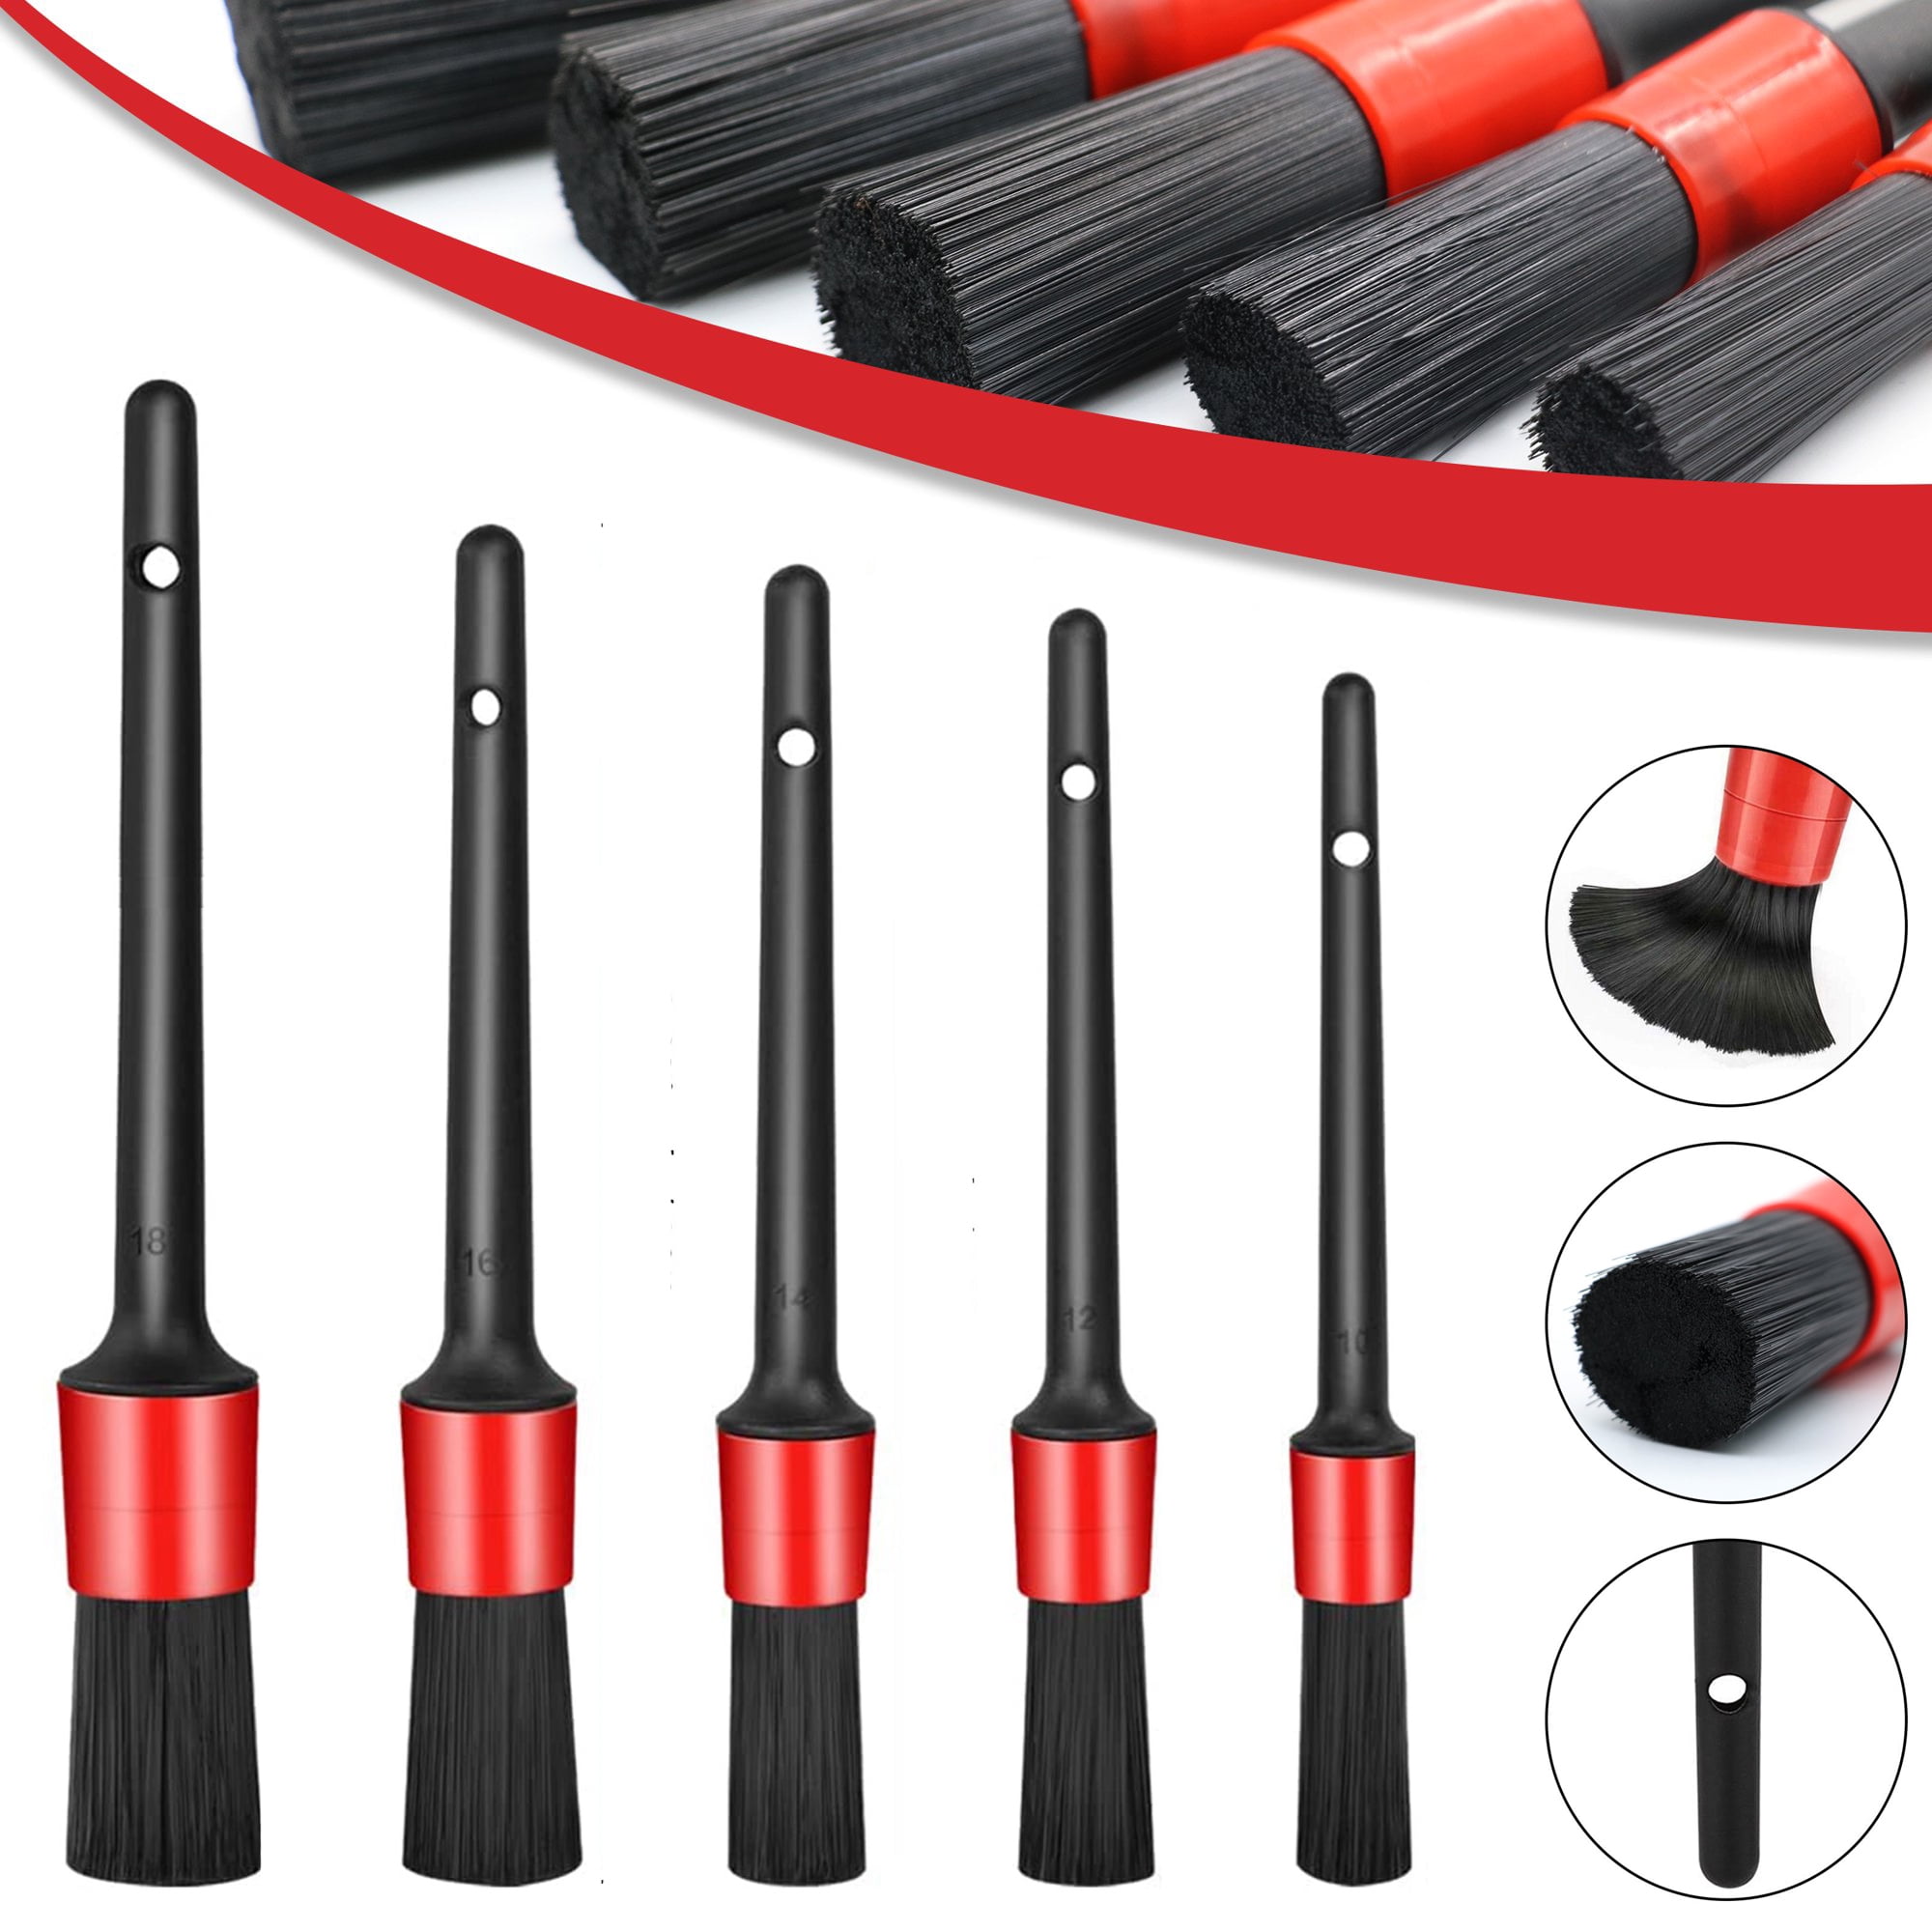 FGY 10 PCS Car Detailing Brush Kit for Auto Interior and Exterior Includes  Detailing Brushes, Wire Brush & Air Vent Brush, Cleaning Towel